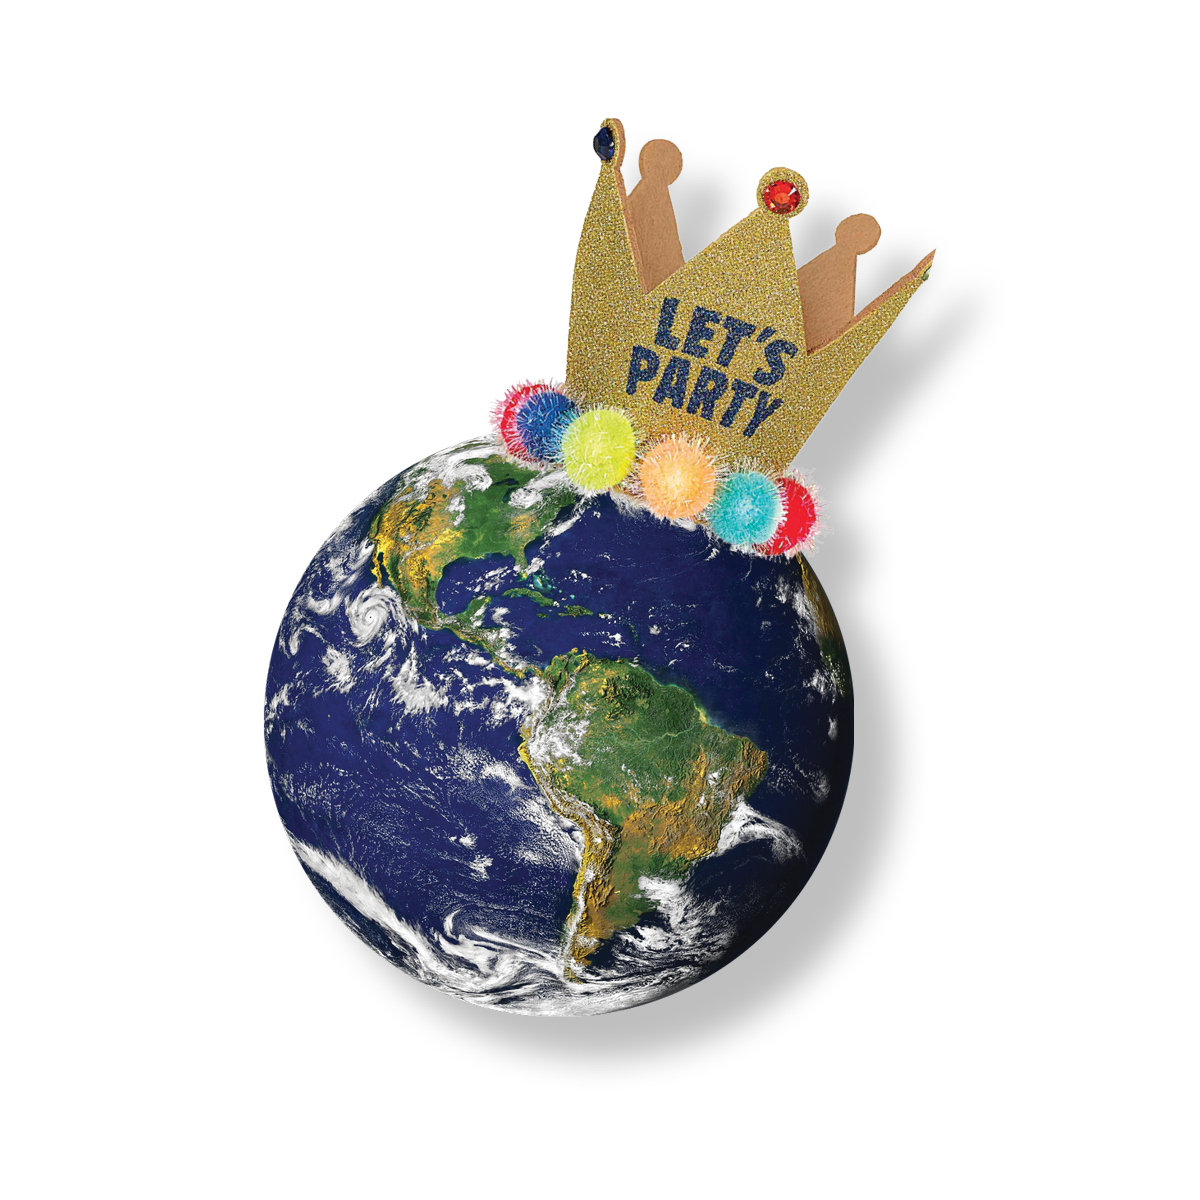 Earth wearing cartoon paper crown which says "Let's Party"